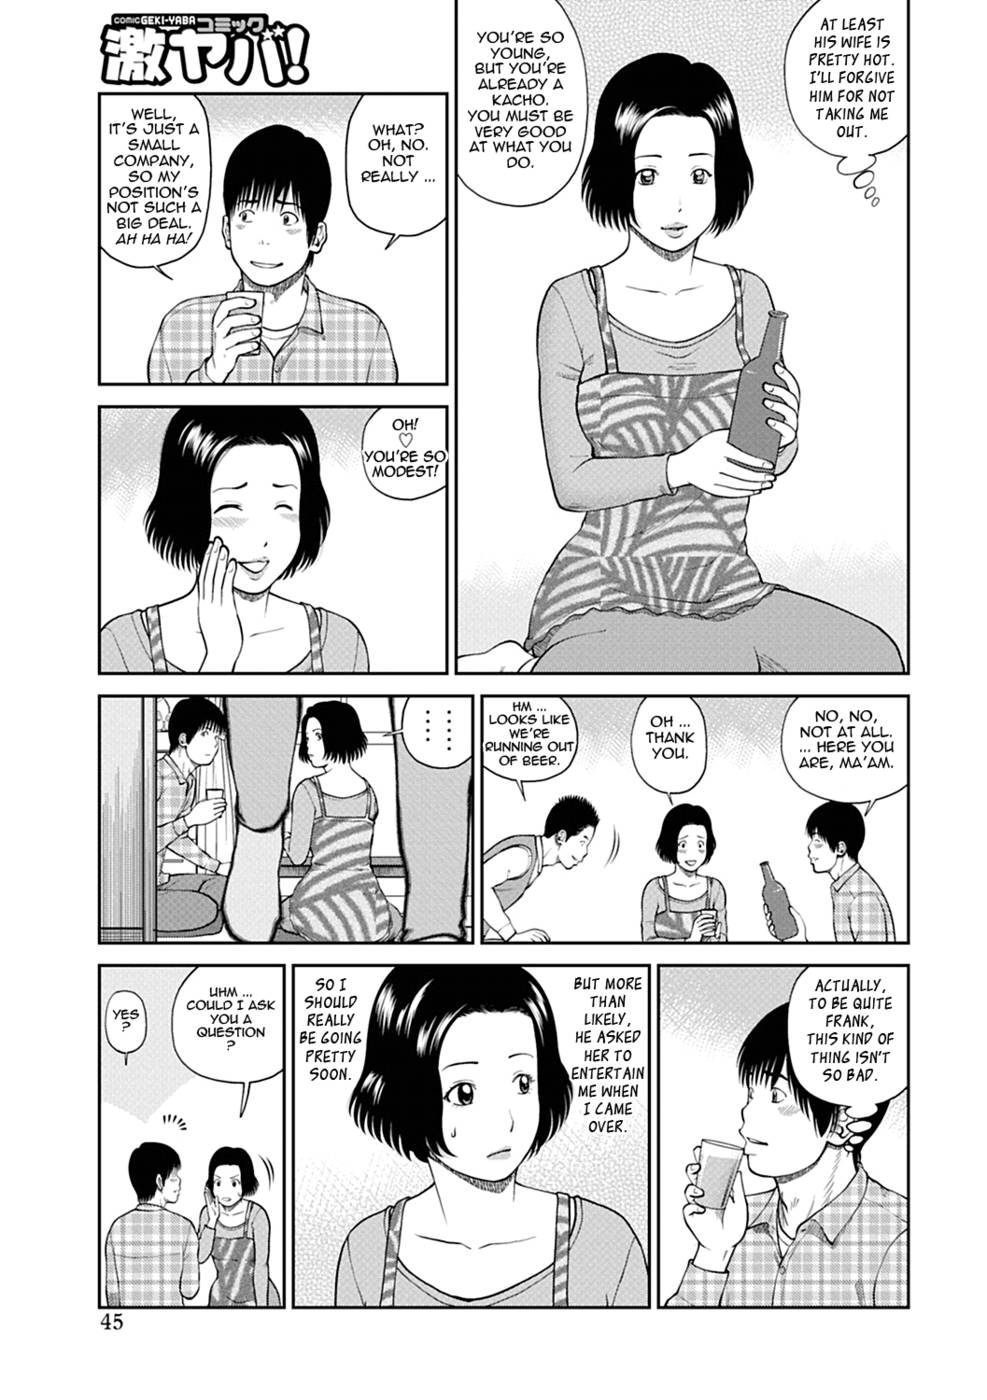 Hentai Manga Comic-34 Year Old Unsatisfied Wife-Chapter 3-Entertaining Wife-First Half-3